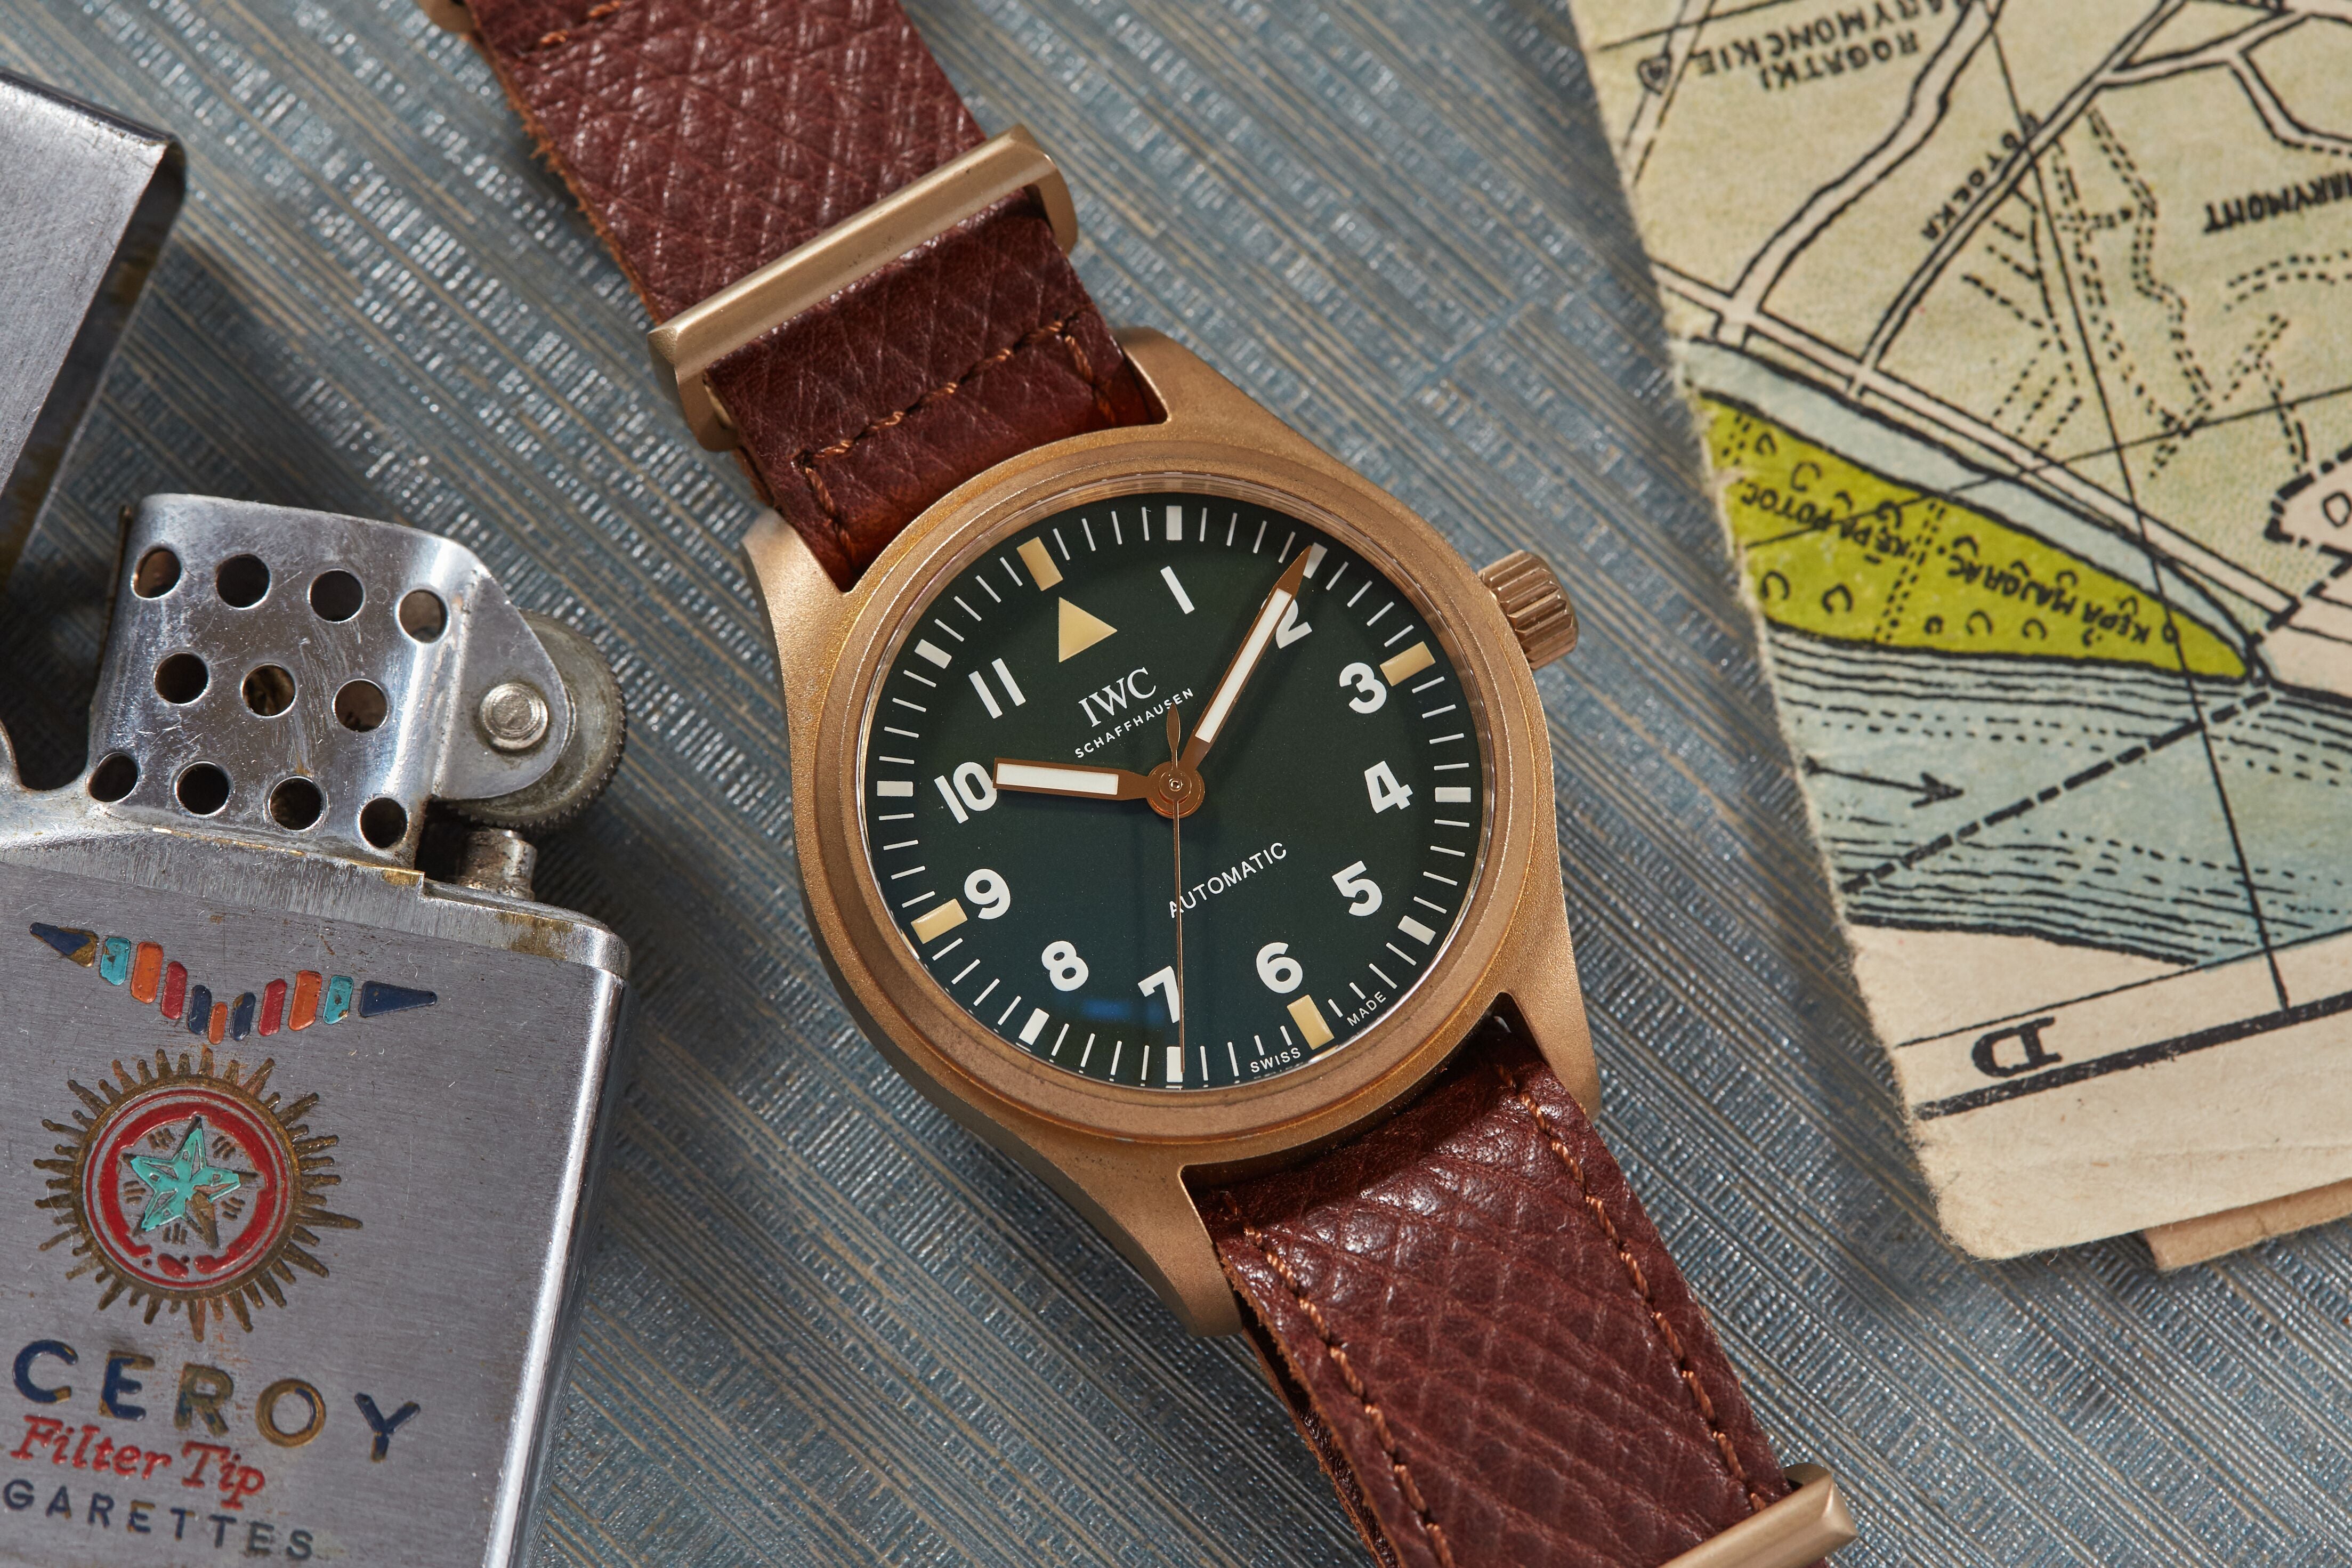 IWC Pilots Watch Special Edition for The Rake & Revolution